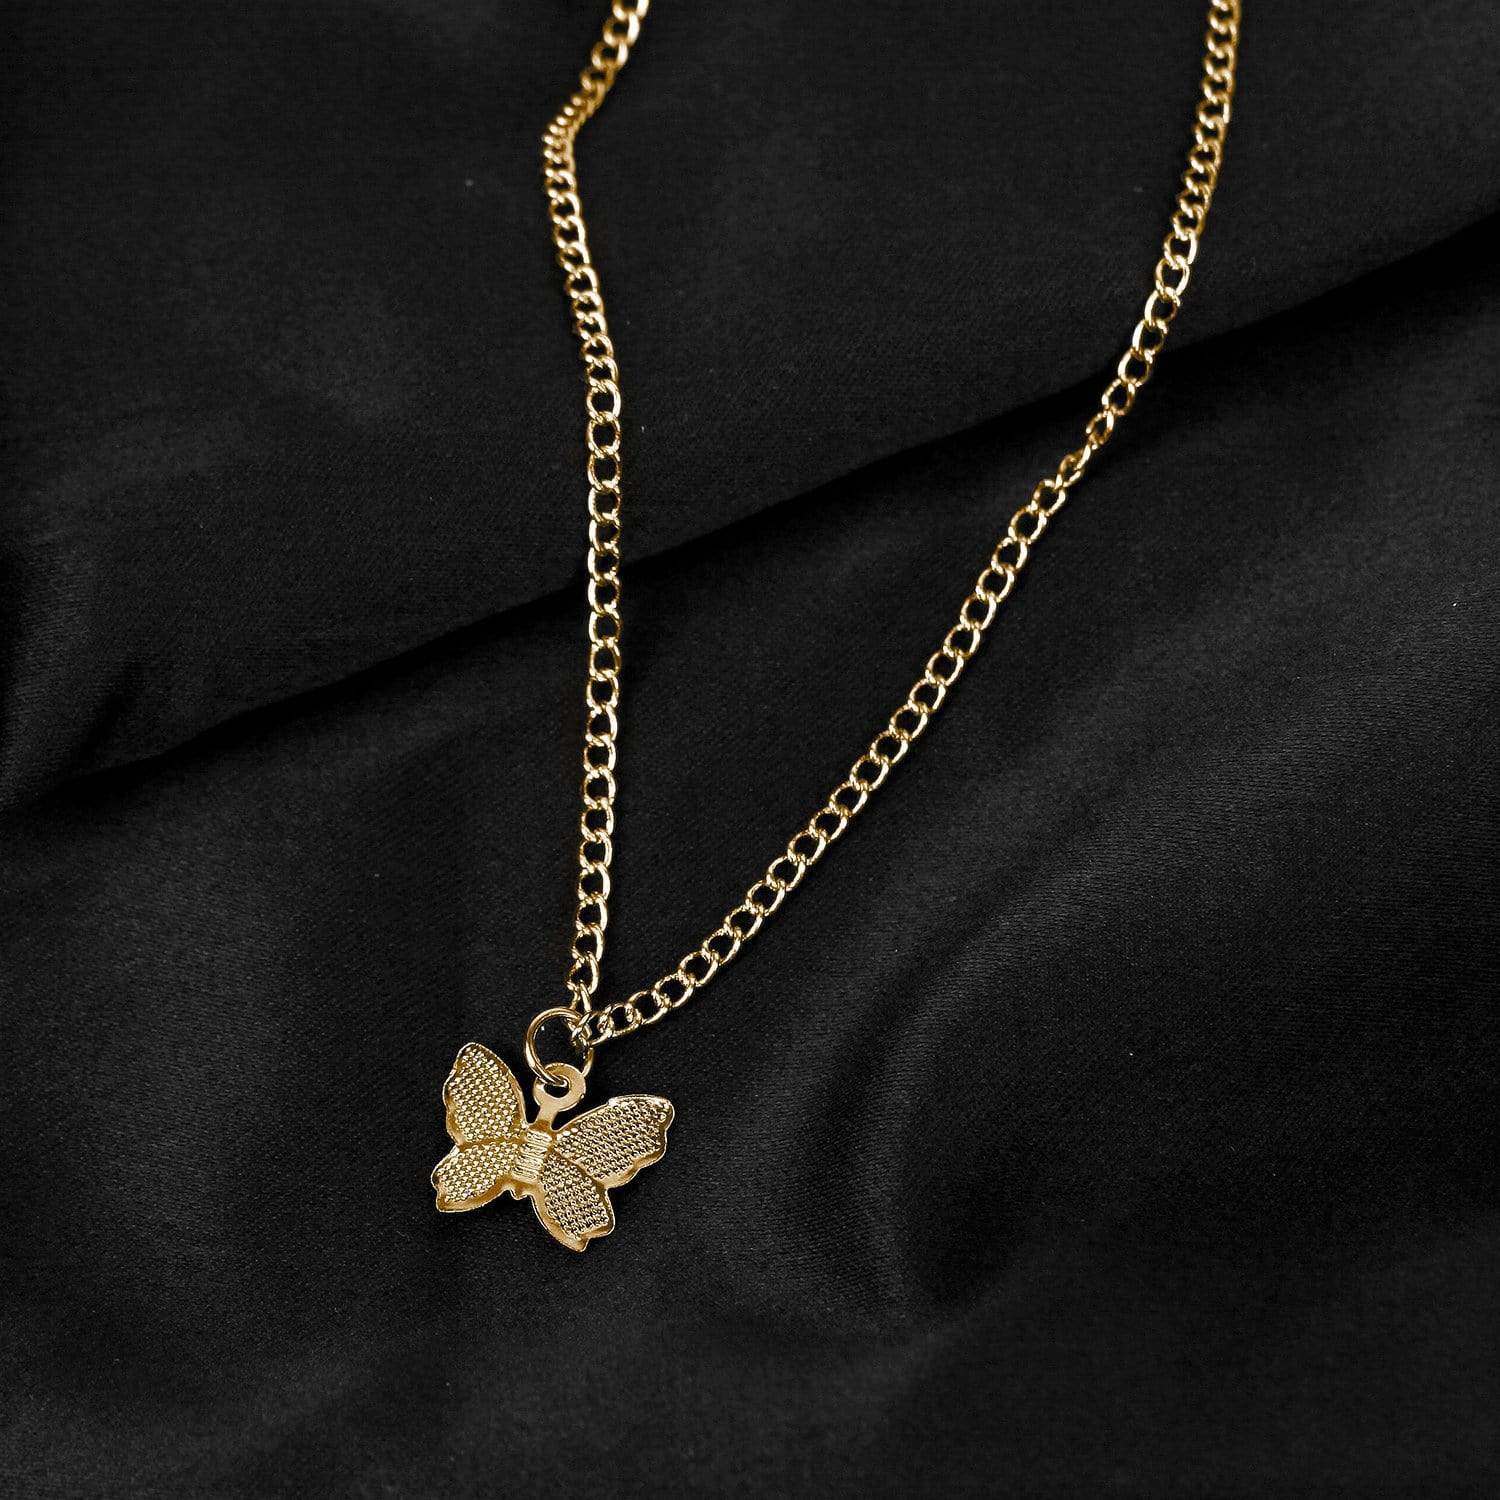 Y2Bae Necklace Butterfly Gold 1 Delilah Necklace